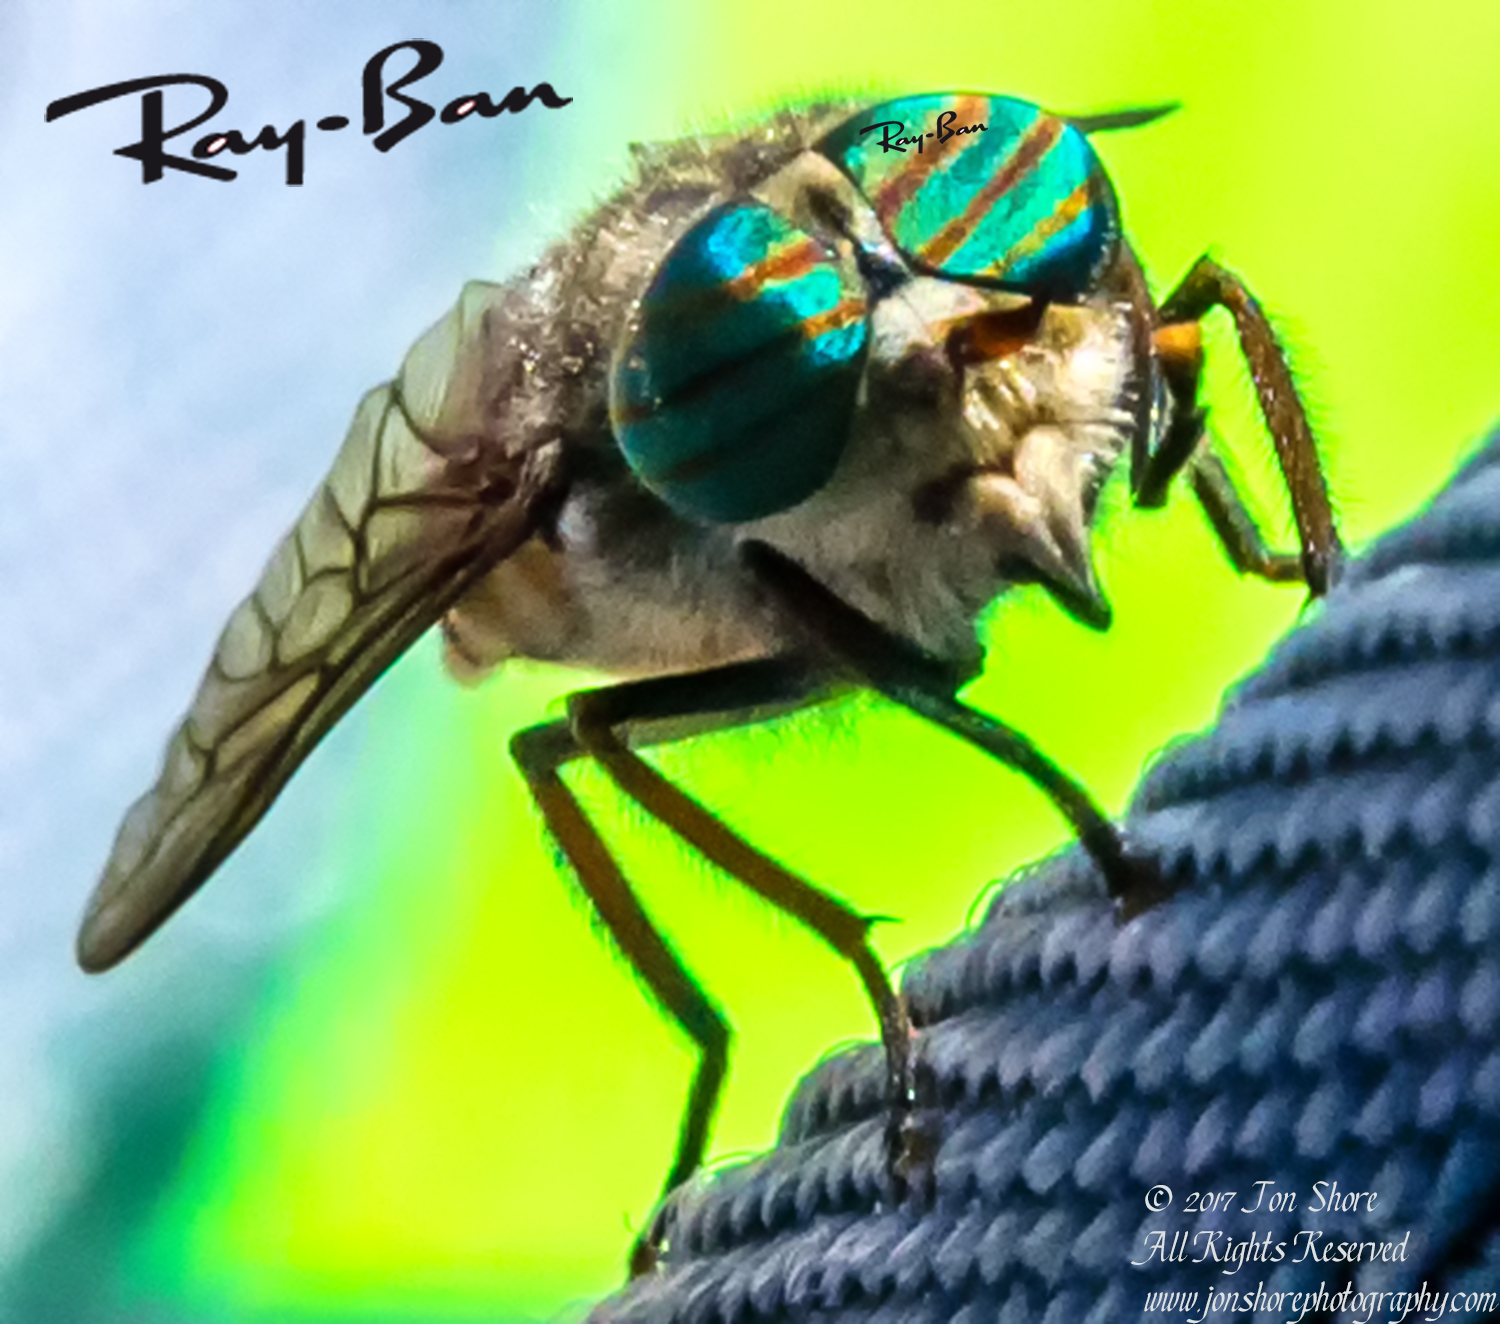 Ray Ban Horse Fly. Nikkor 200mm